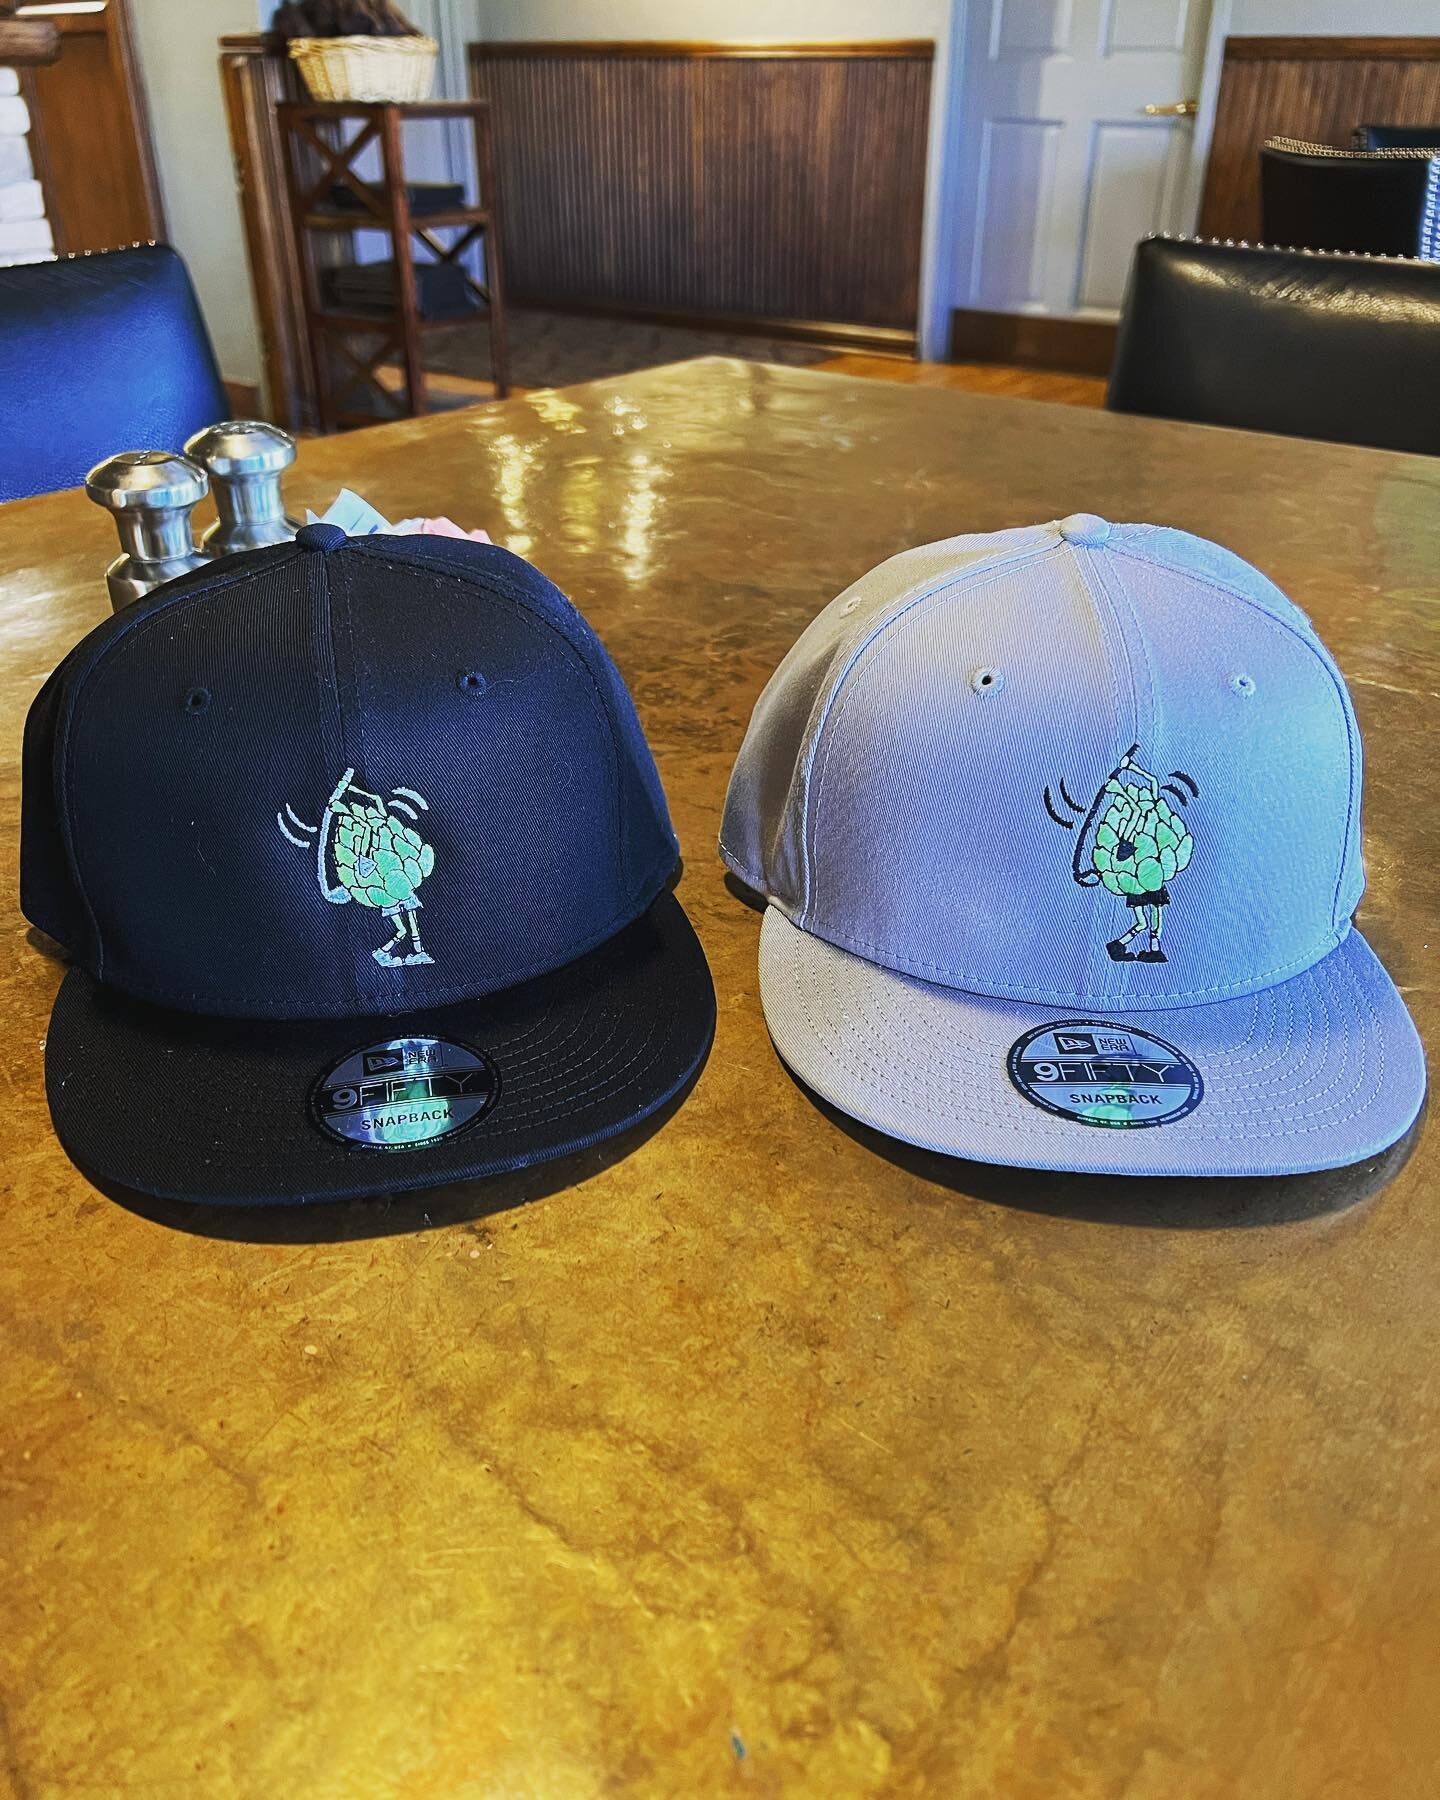 Got a couple inquiries regarding these hats! We just got these but hit up our website, different colors available&hellip;⛳️🏌🏽